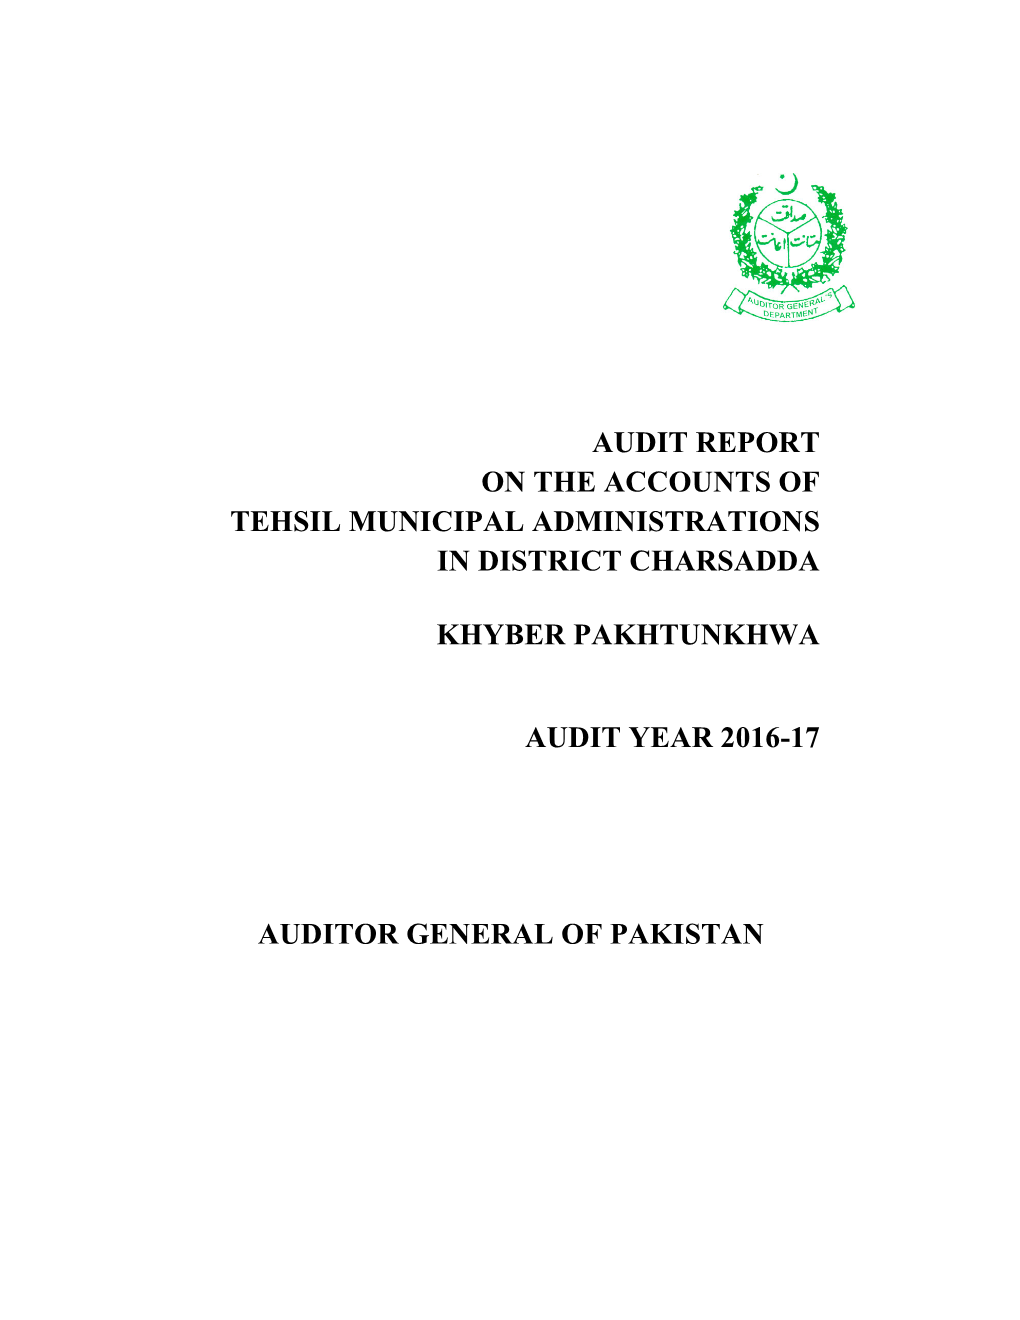 Audit Report on the Accounts of Tehsil Municipal Administrations in District Charsadda